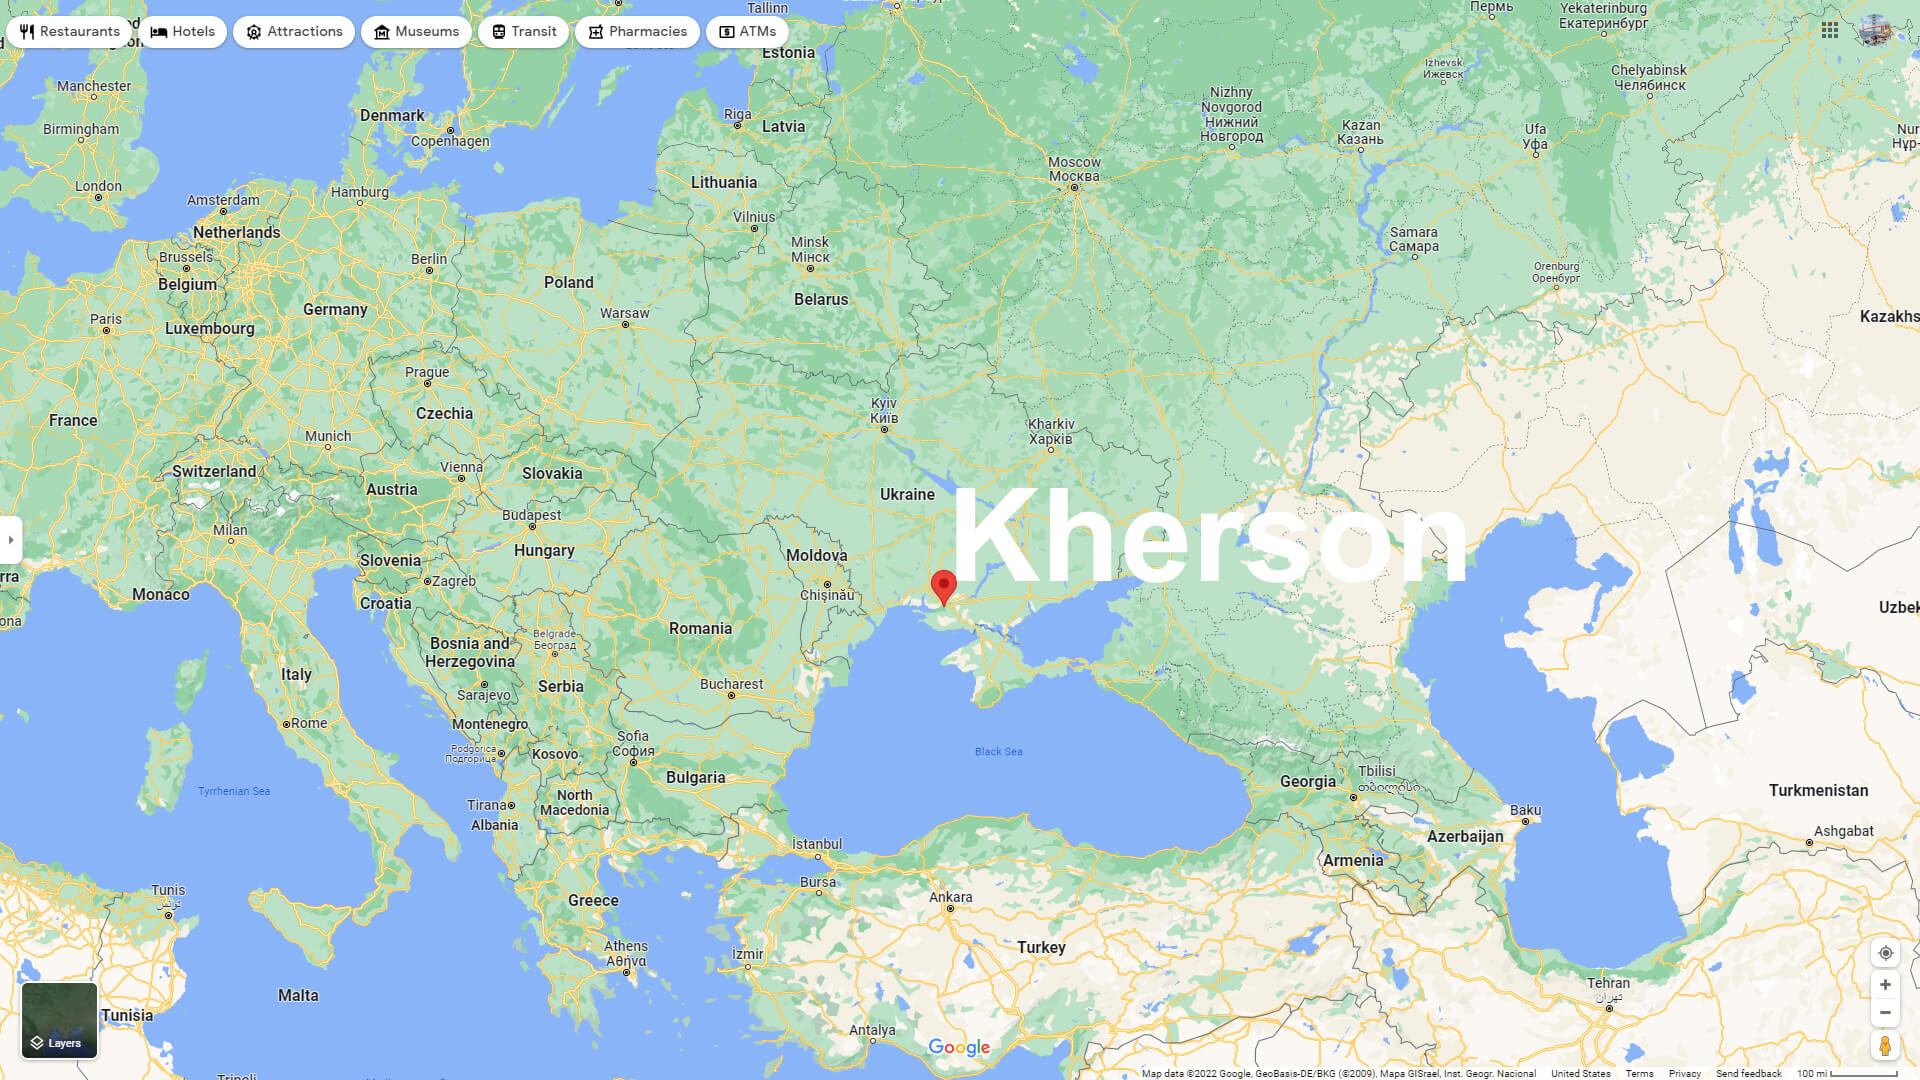 Where is Located Kherson in in Europe